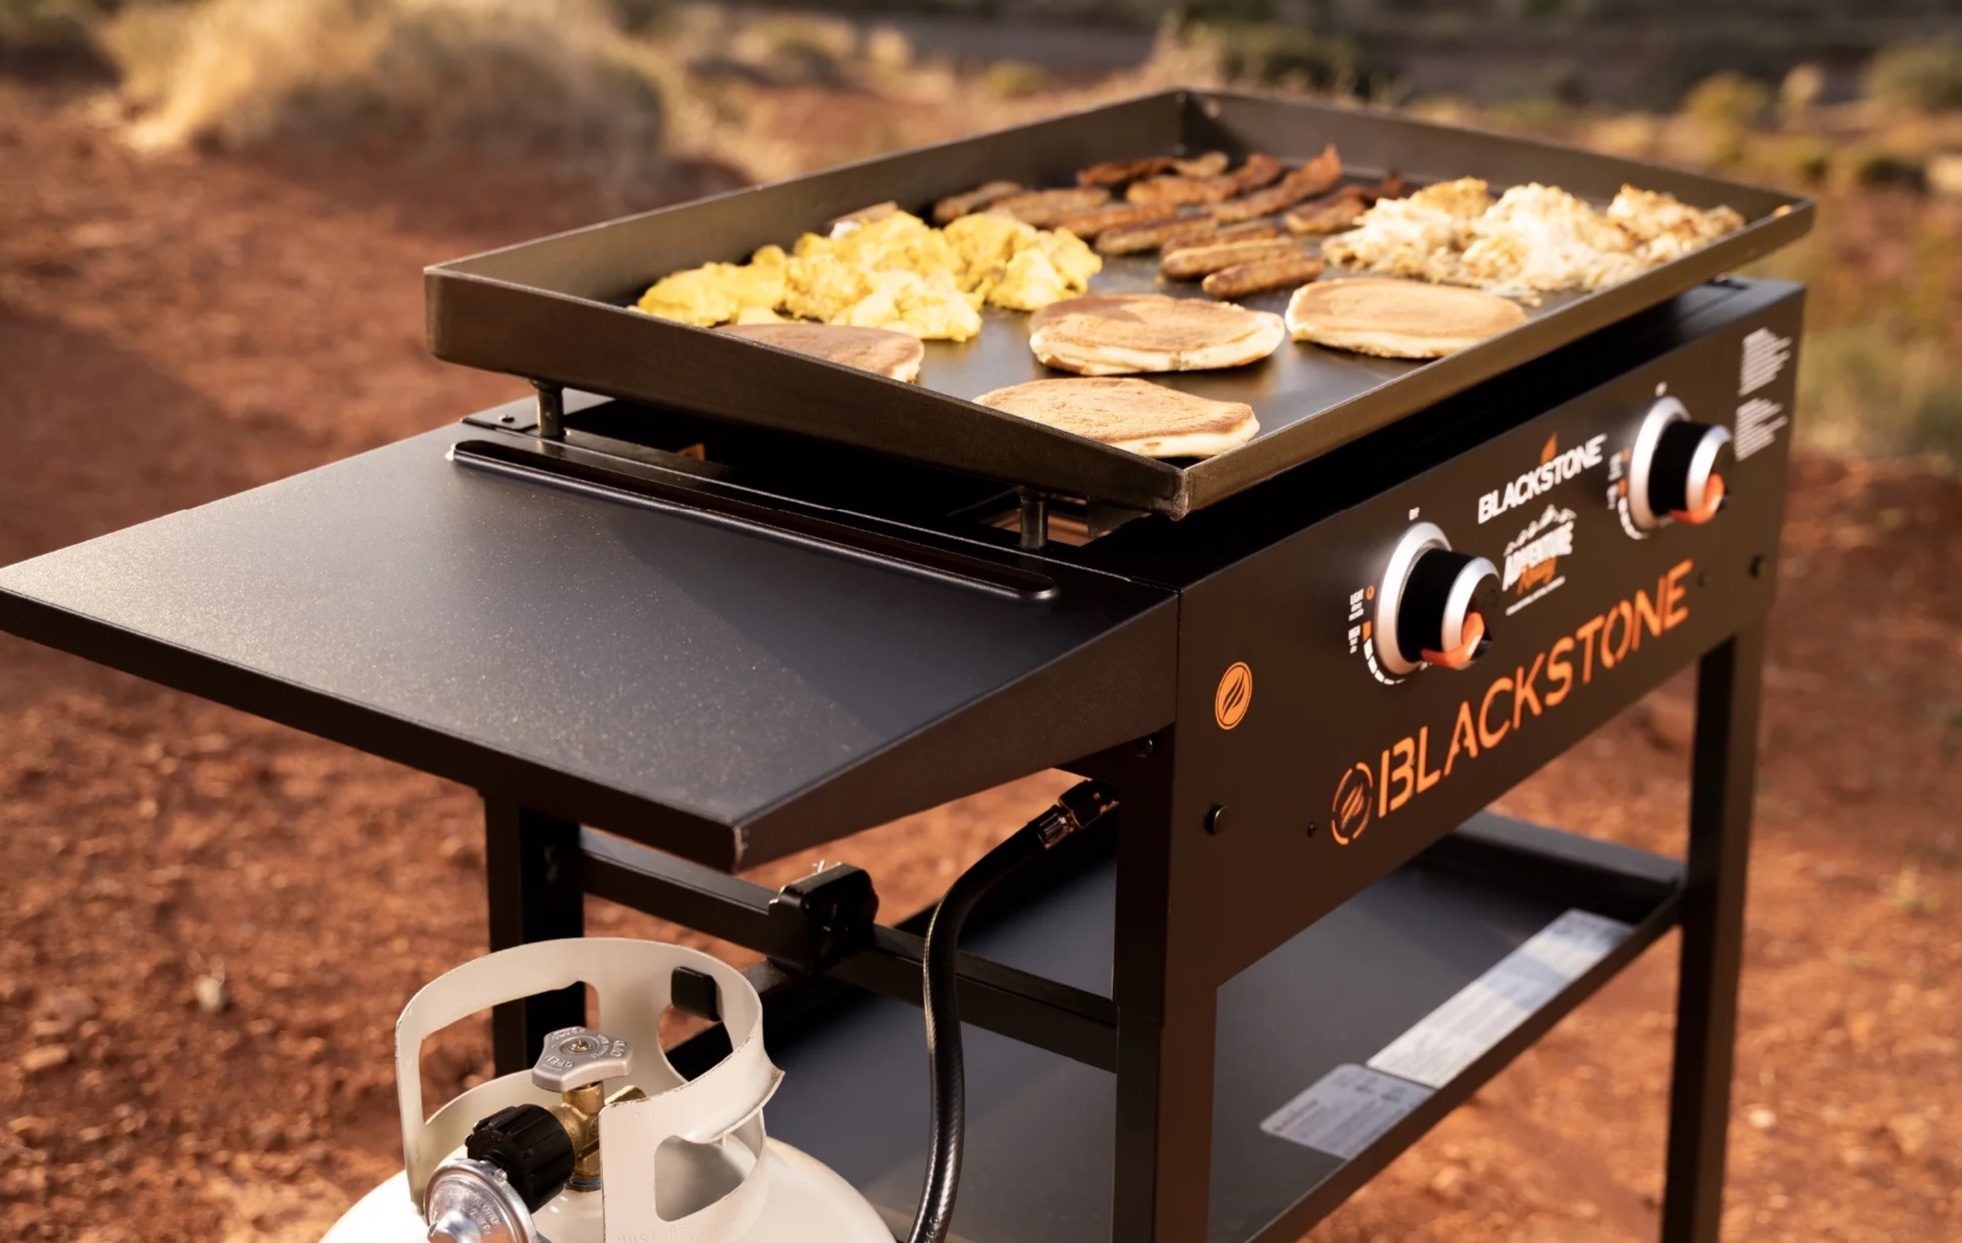 https://www.themanual.com/wp-content/uploads/sites/9/2023/10/Blackstone-Griddle-two-burner-with-breakfast-cooking-e1697655186282.jpg?fit=800%2C506&p=1